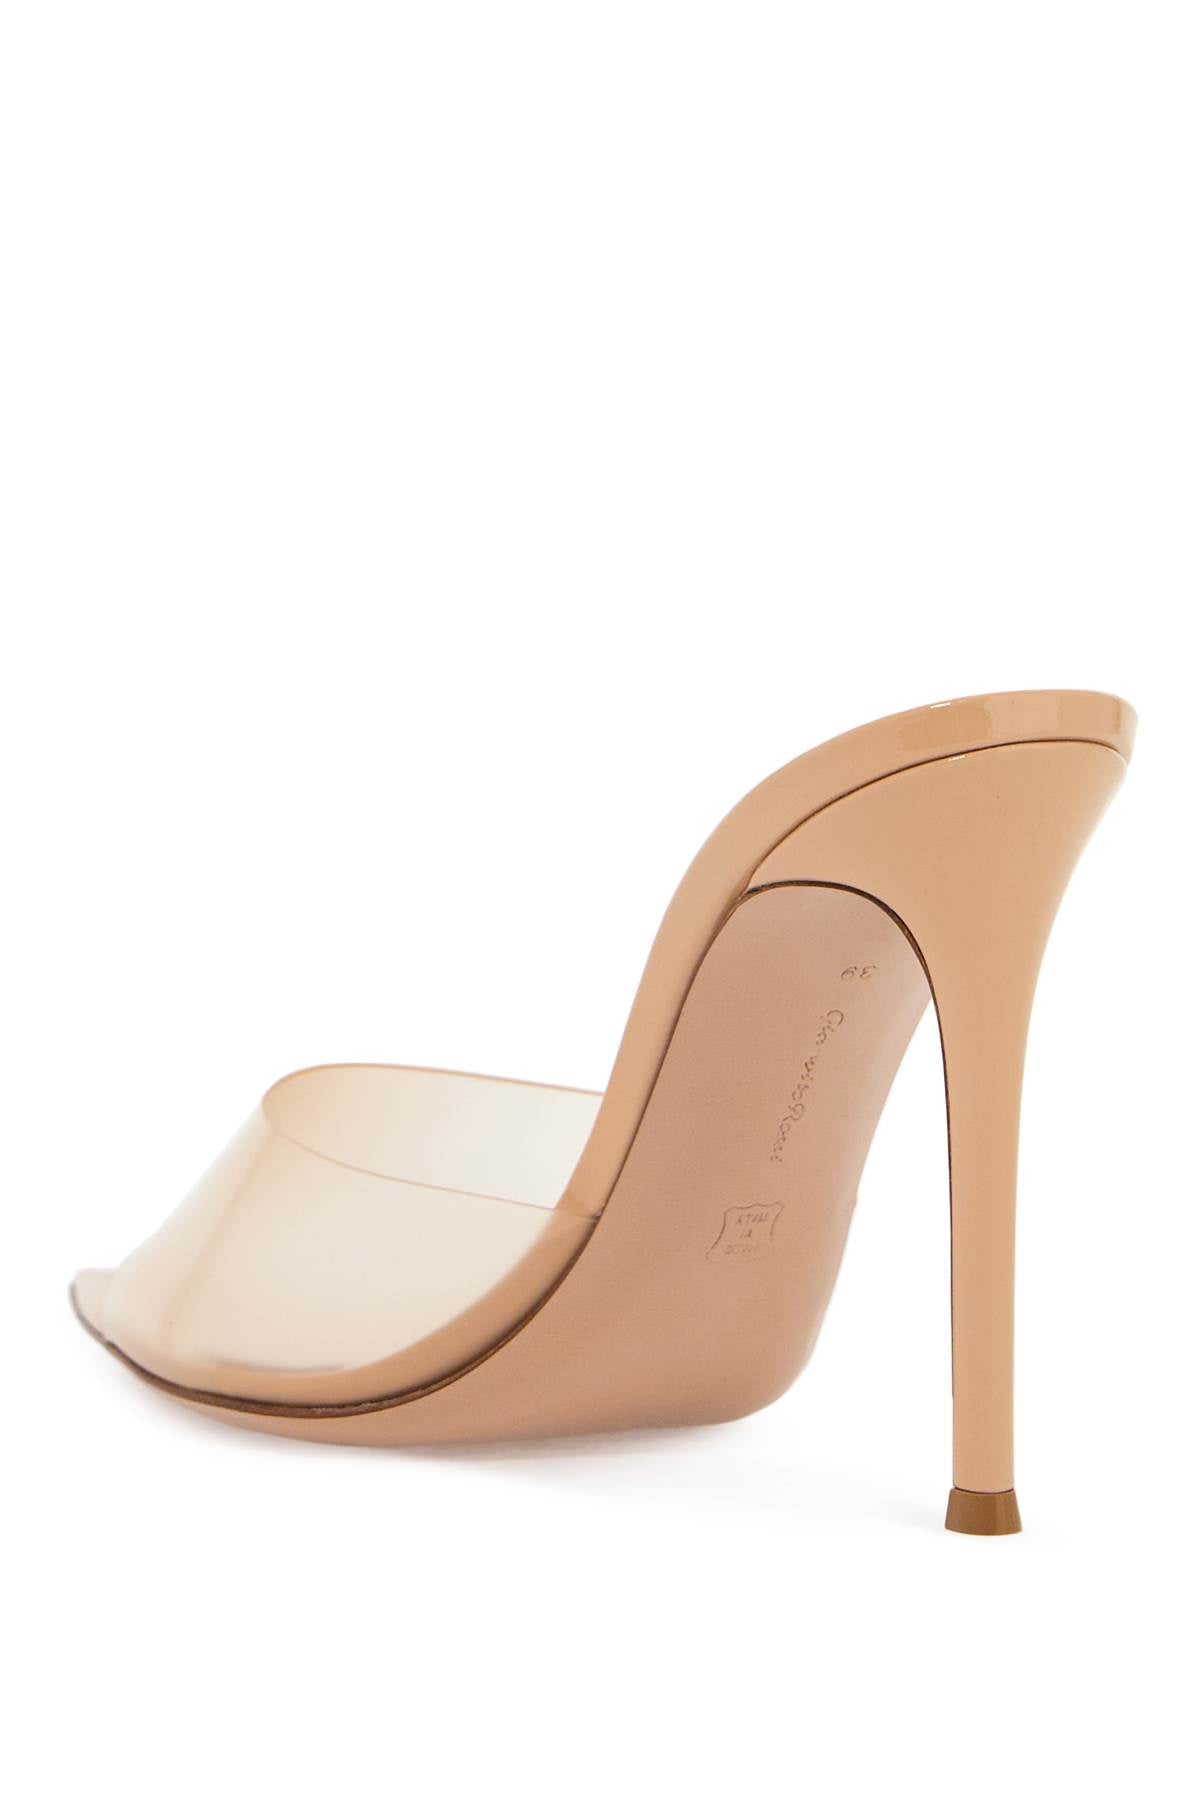 GIANVITO ROSSI Stunning Patent Leather Sandals for Women